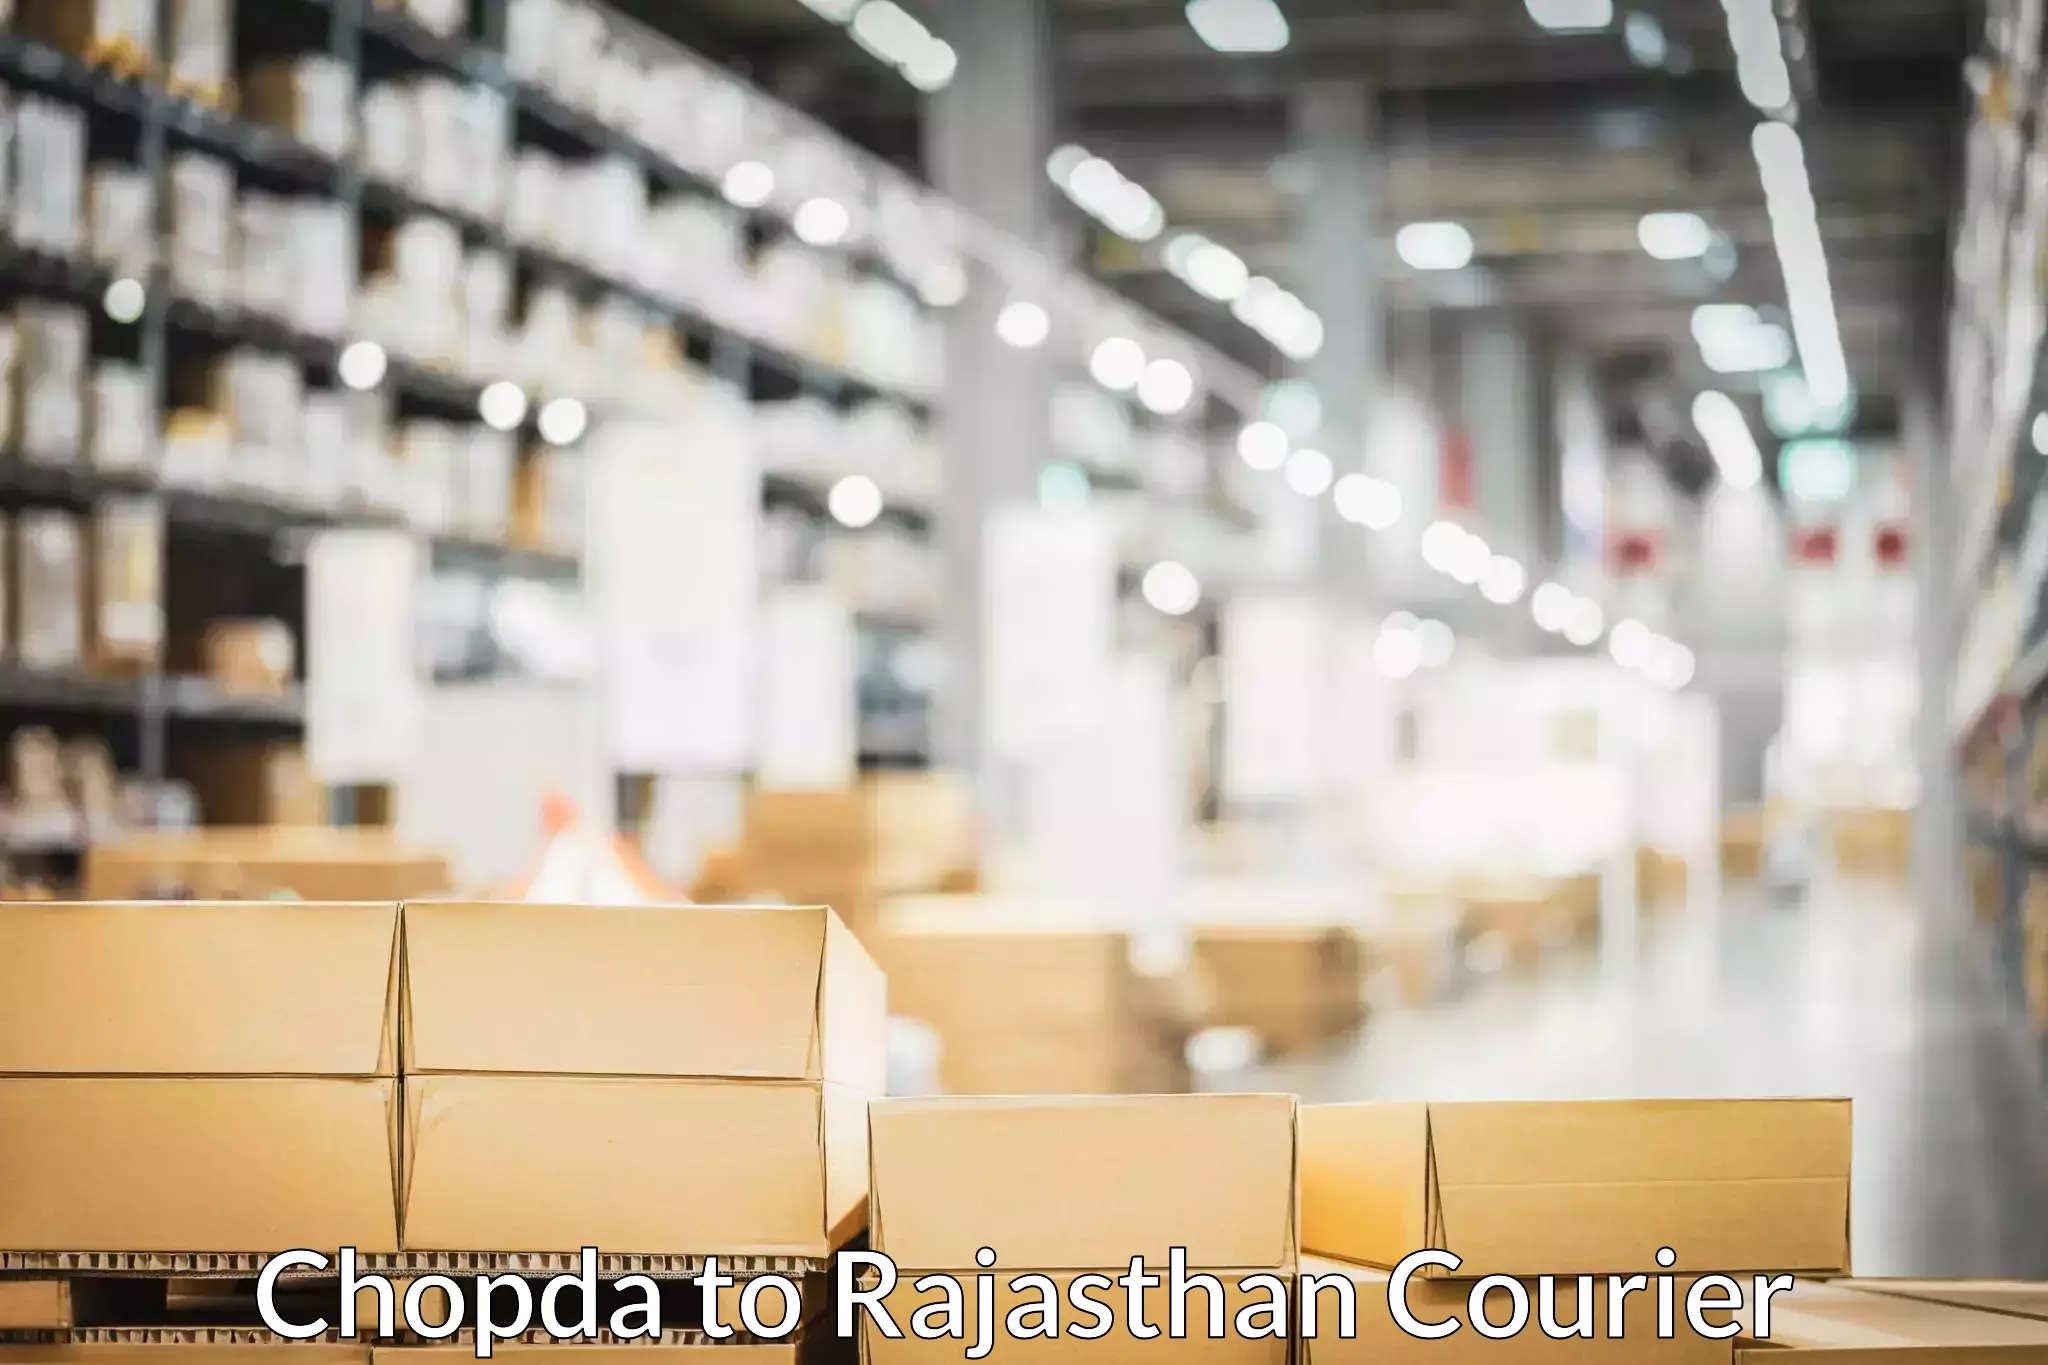 Furniture delivery service Chopda to Rajasthan